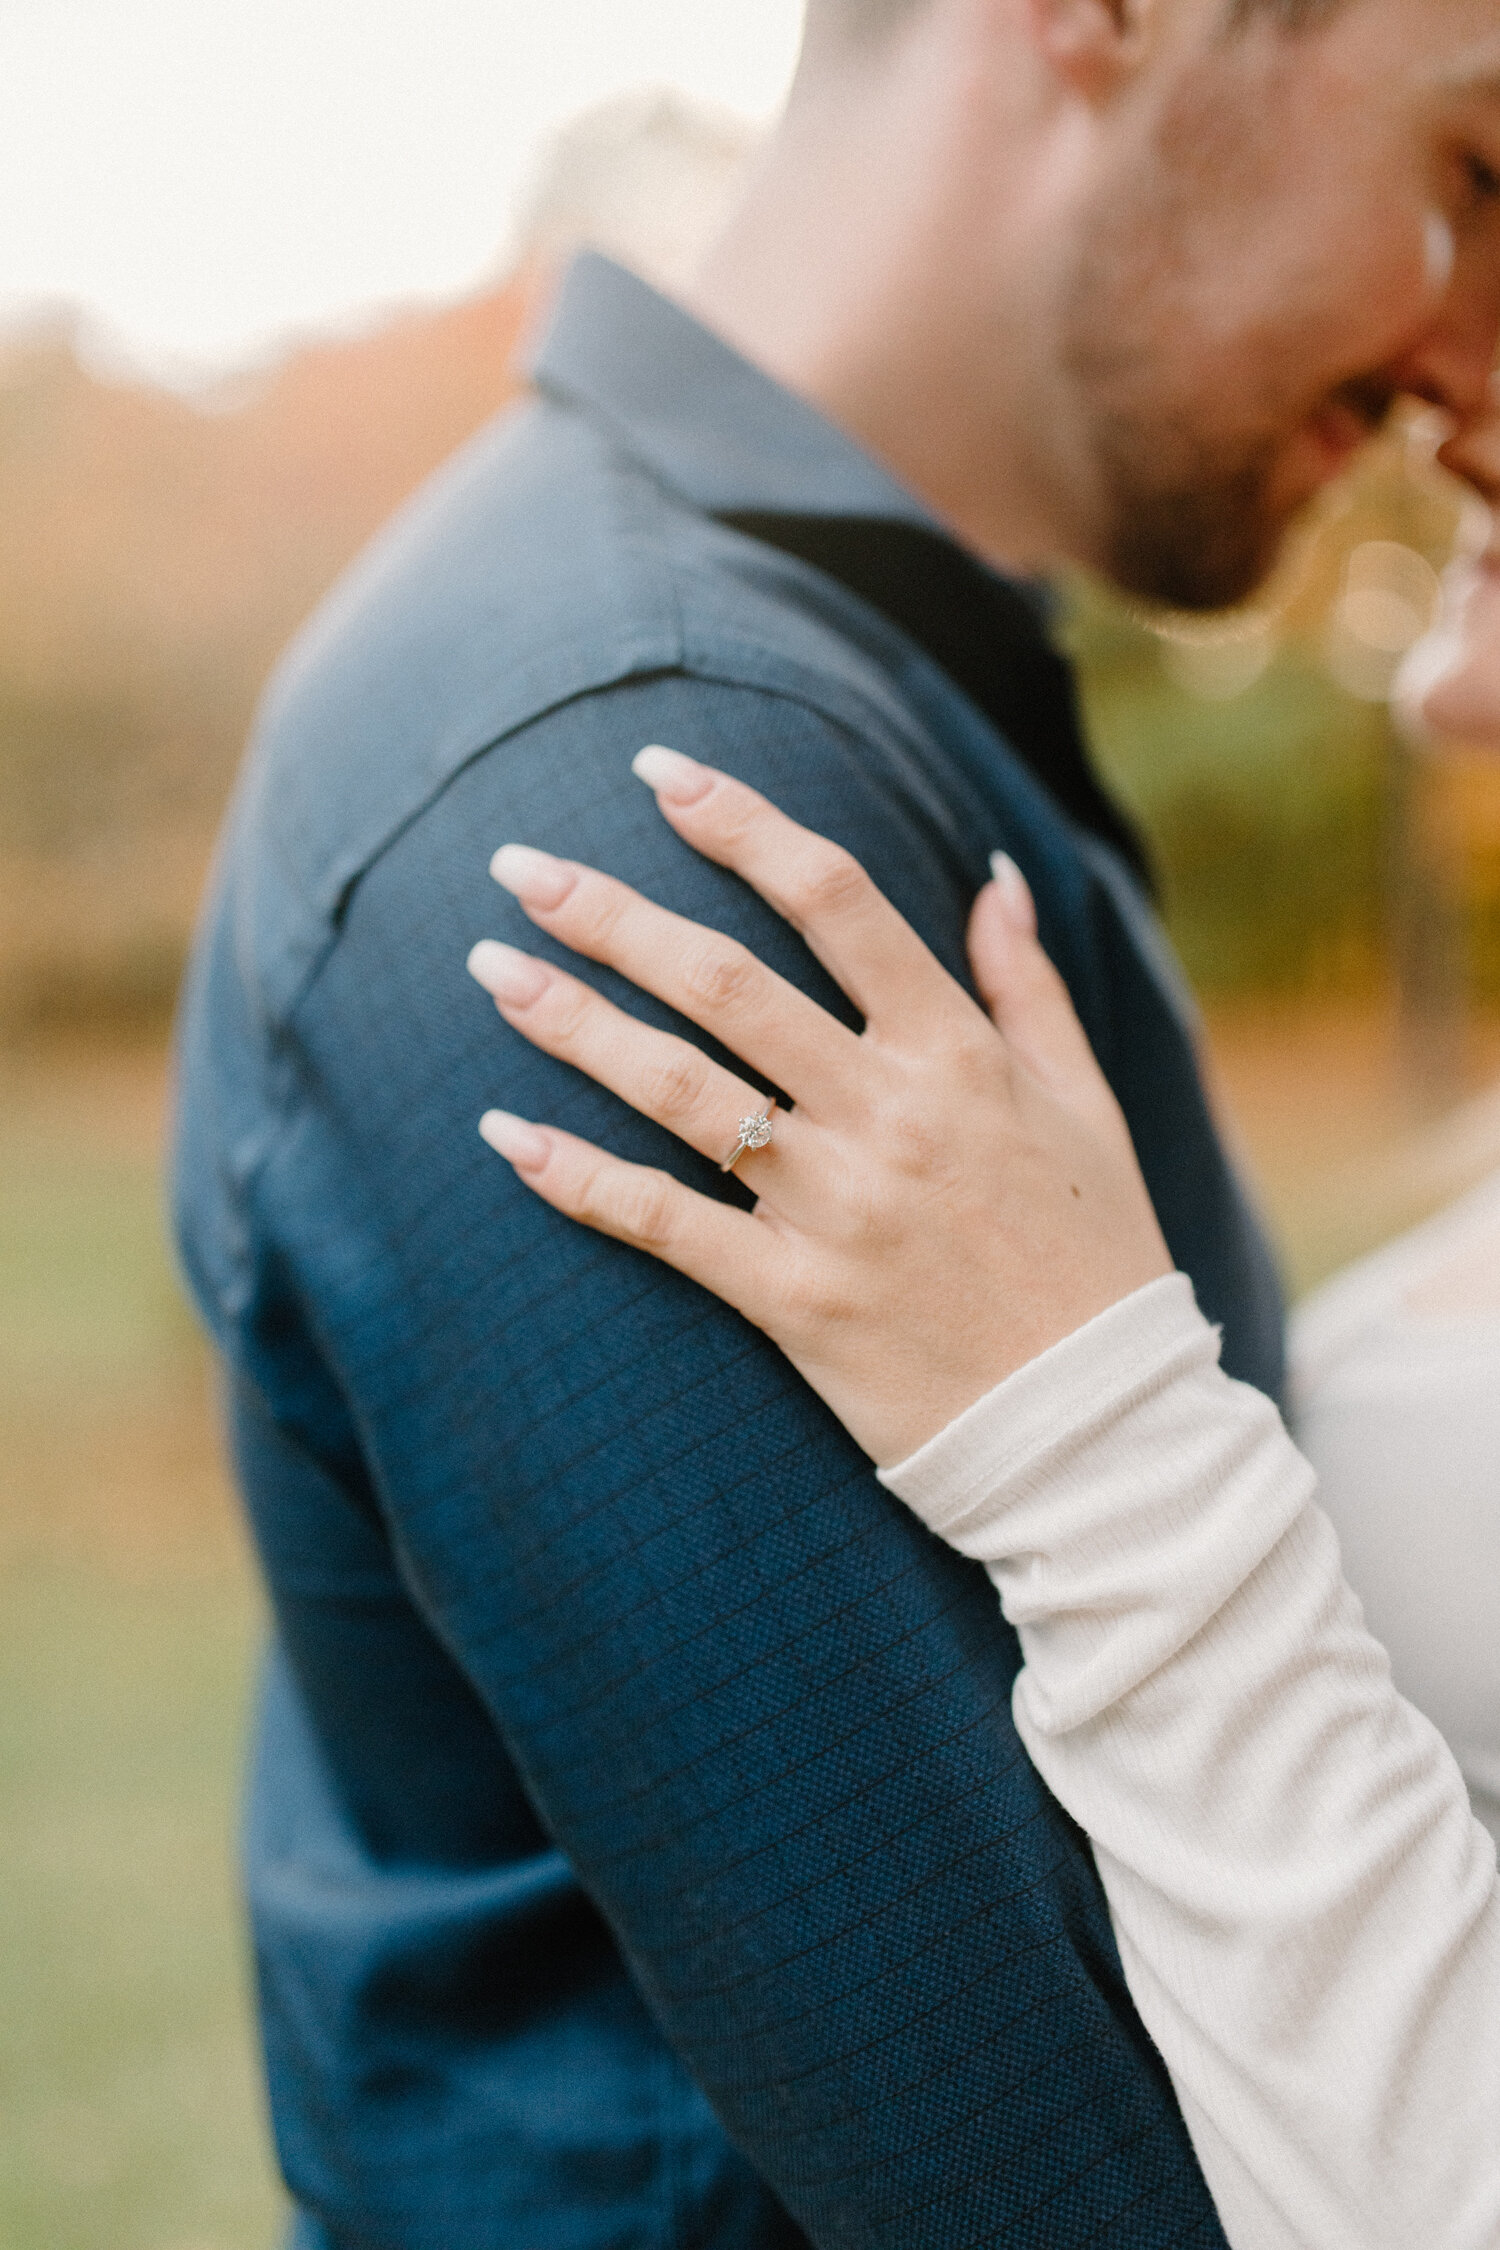  During this Quebec, Canada engagement session, Chelsea Mason Photography captures an up-close ring shot of this white gold solitaire diamond ring. round solitaire diamond white gold ring, mens checkered dark blue button up shirt, womans hand on groo